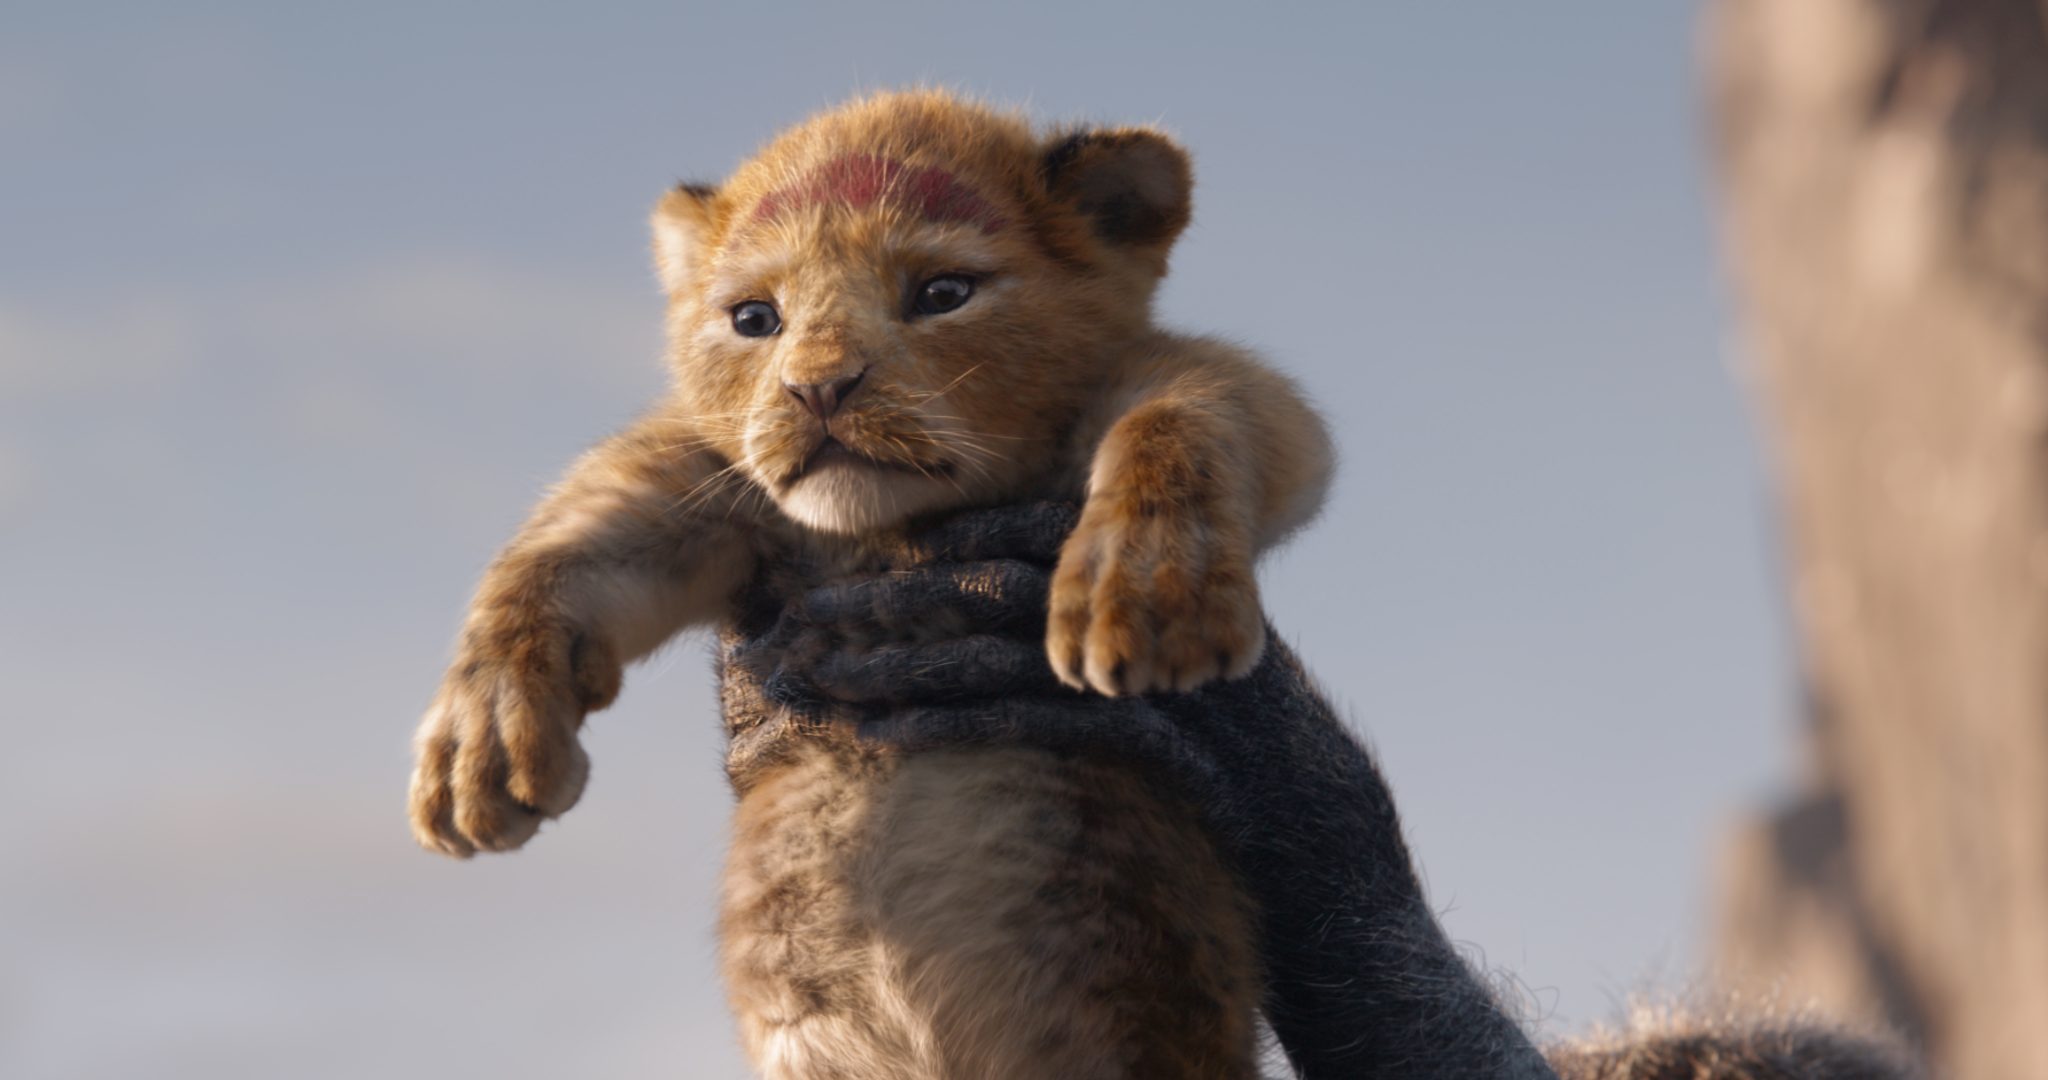 The Lion King. © 2019 Walt Disney Studios. All rights reserved. VFX by MPC Film